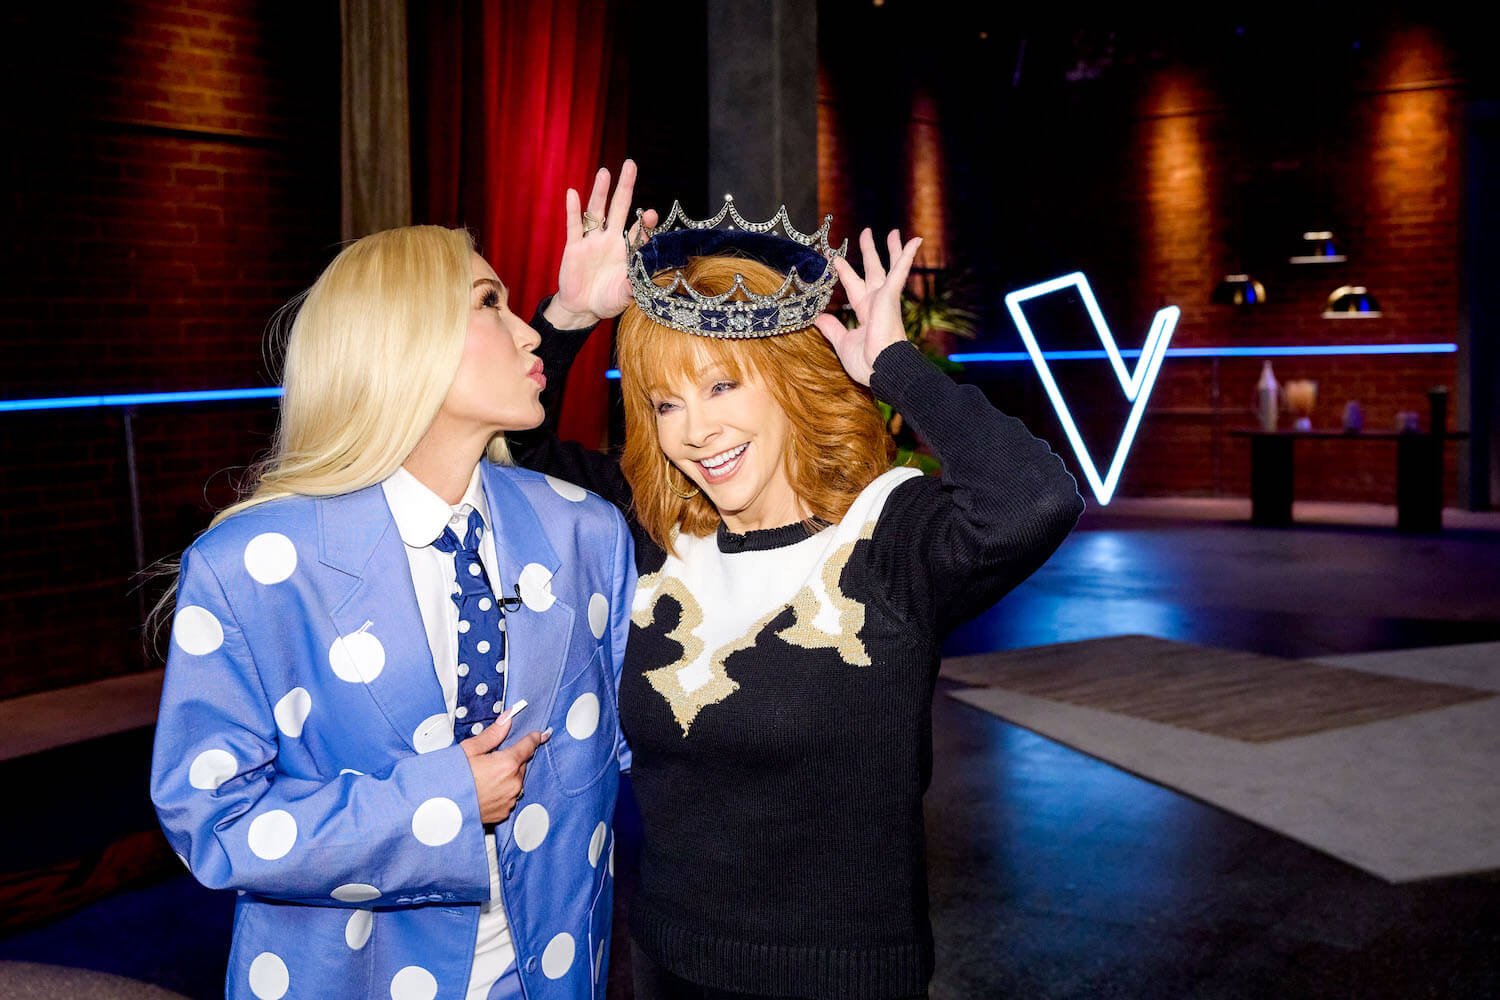 'The Voice' star Gwen Stefani kissing Reba McEntire's cheek as McEntire holds a crown over her head.